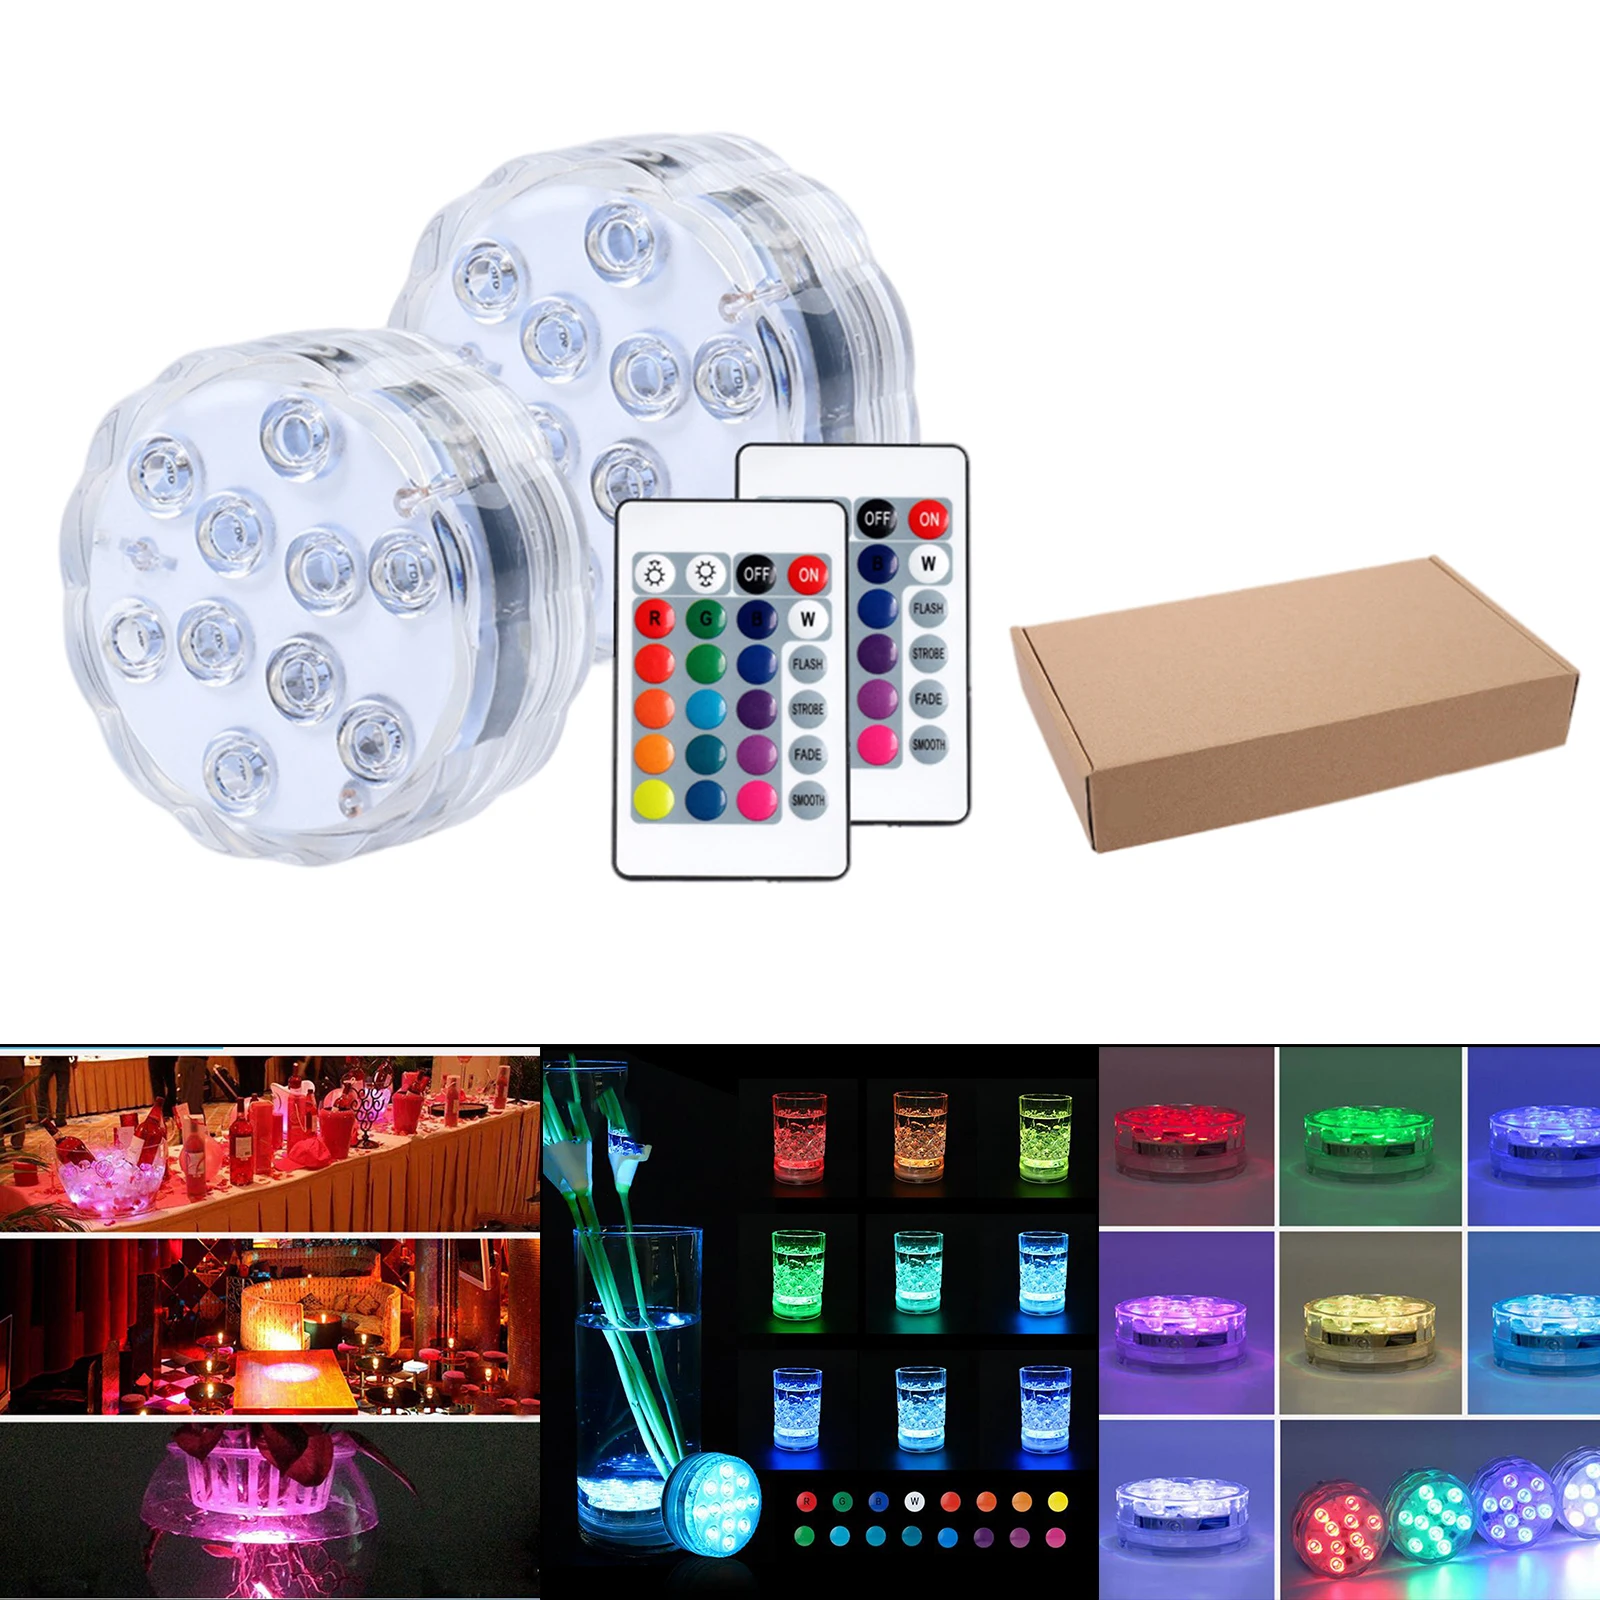 16-Color RGB Submersible LED Lights Waterproof Swimming Pools 7color Lights Underwater Lights with Suction Cup